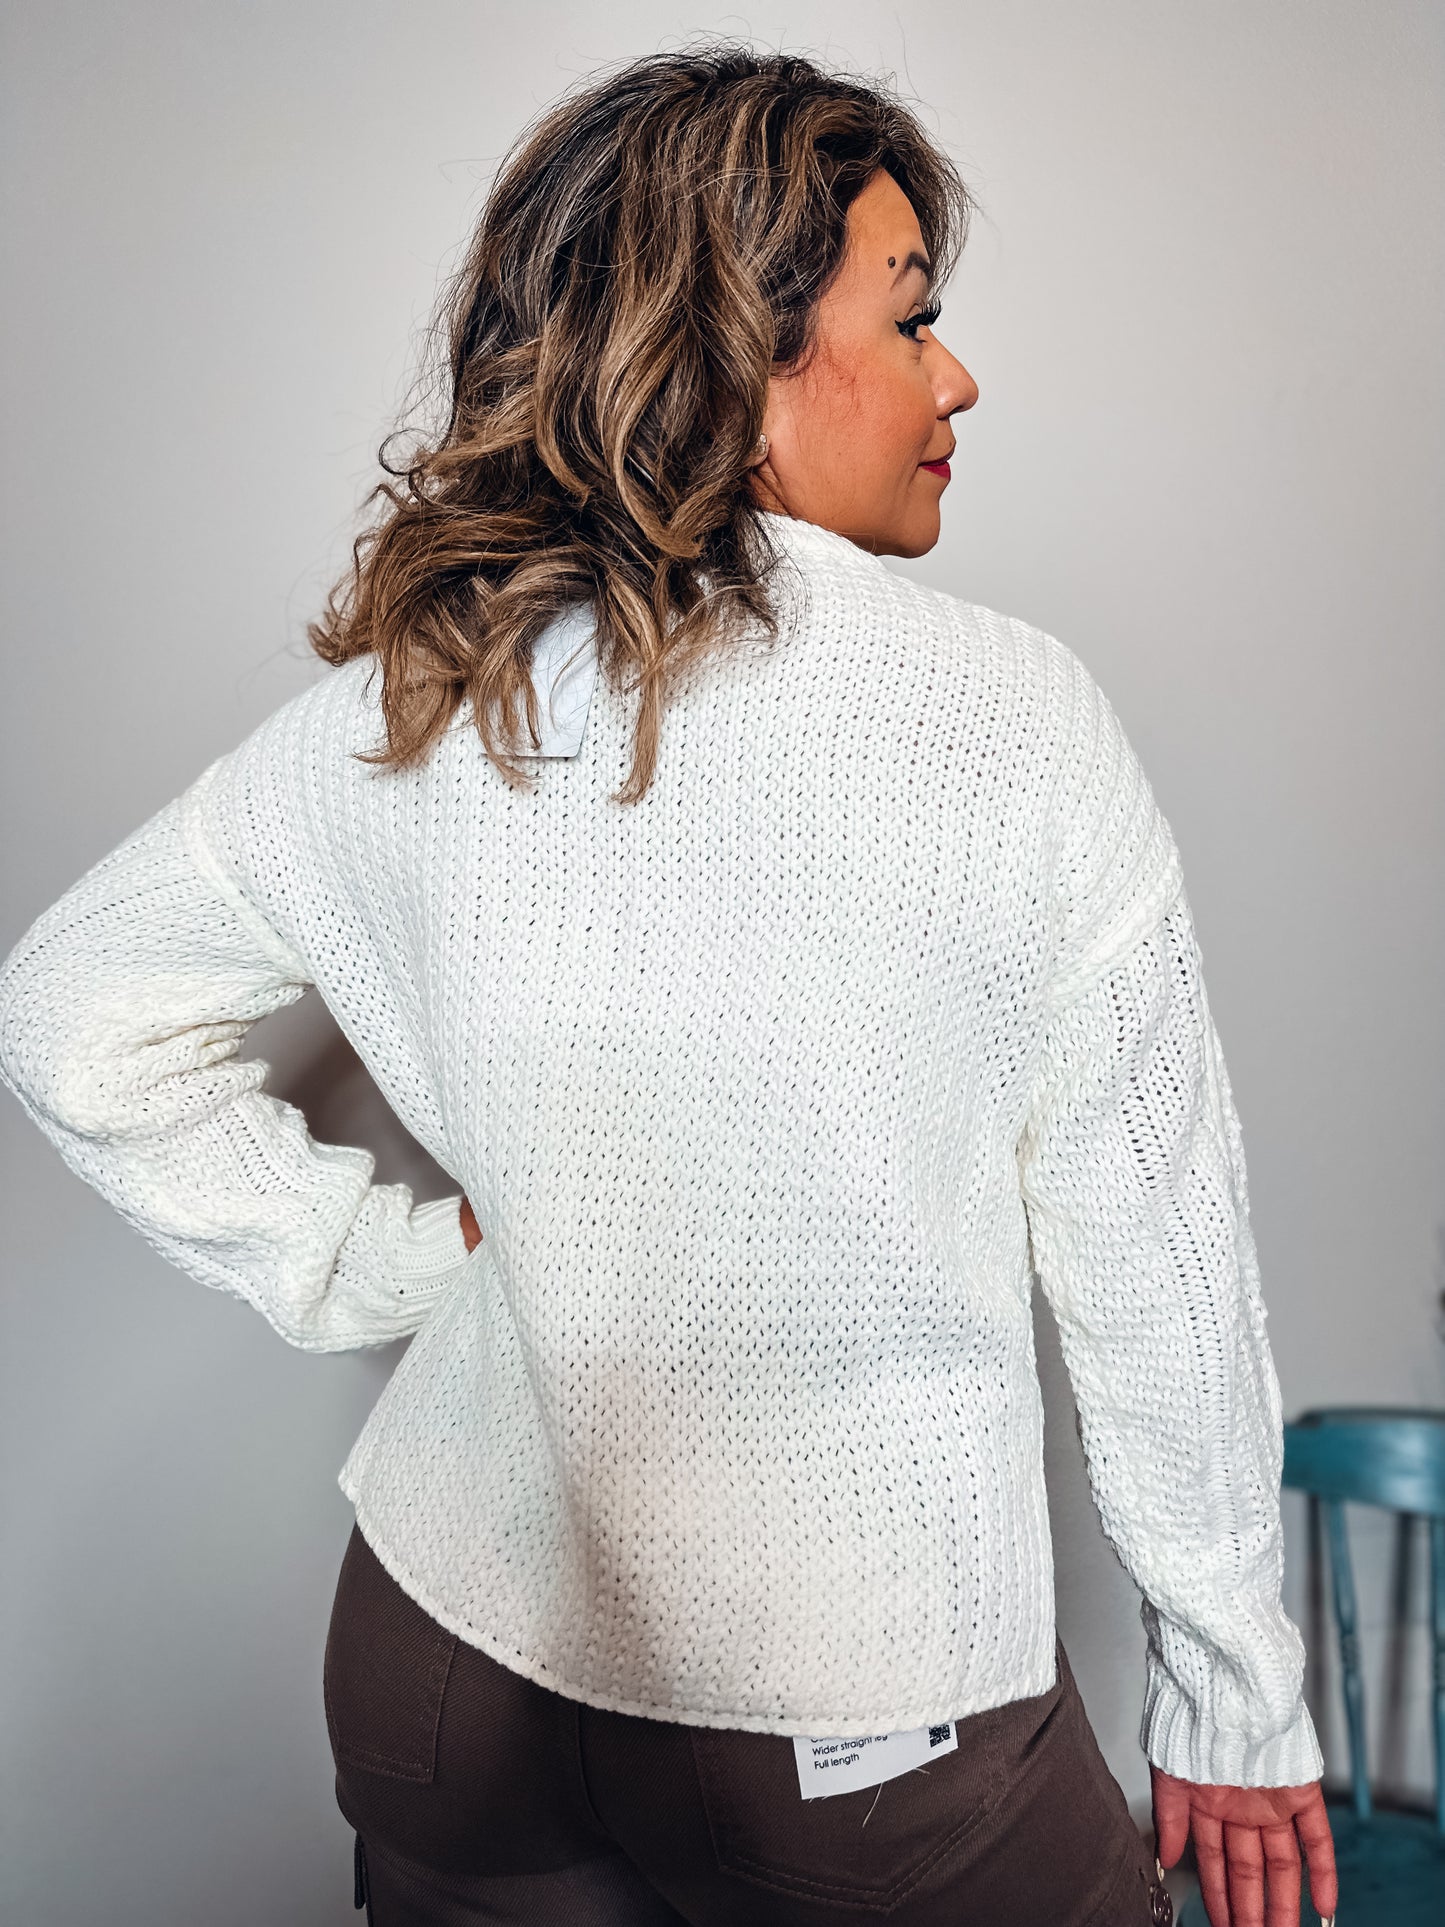 Winter White Cable Knit Sweater